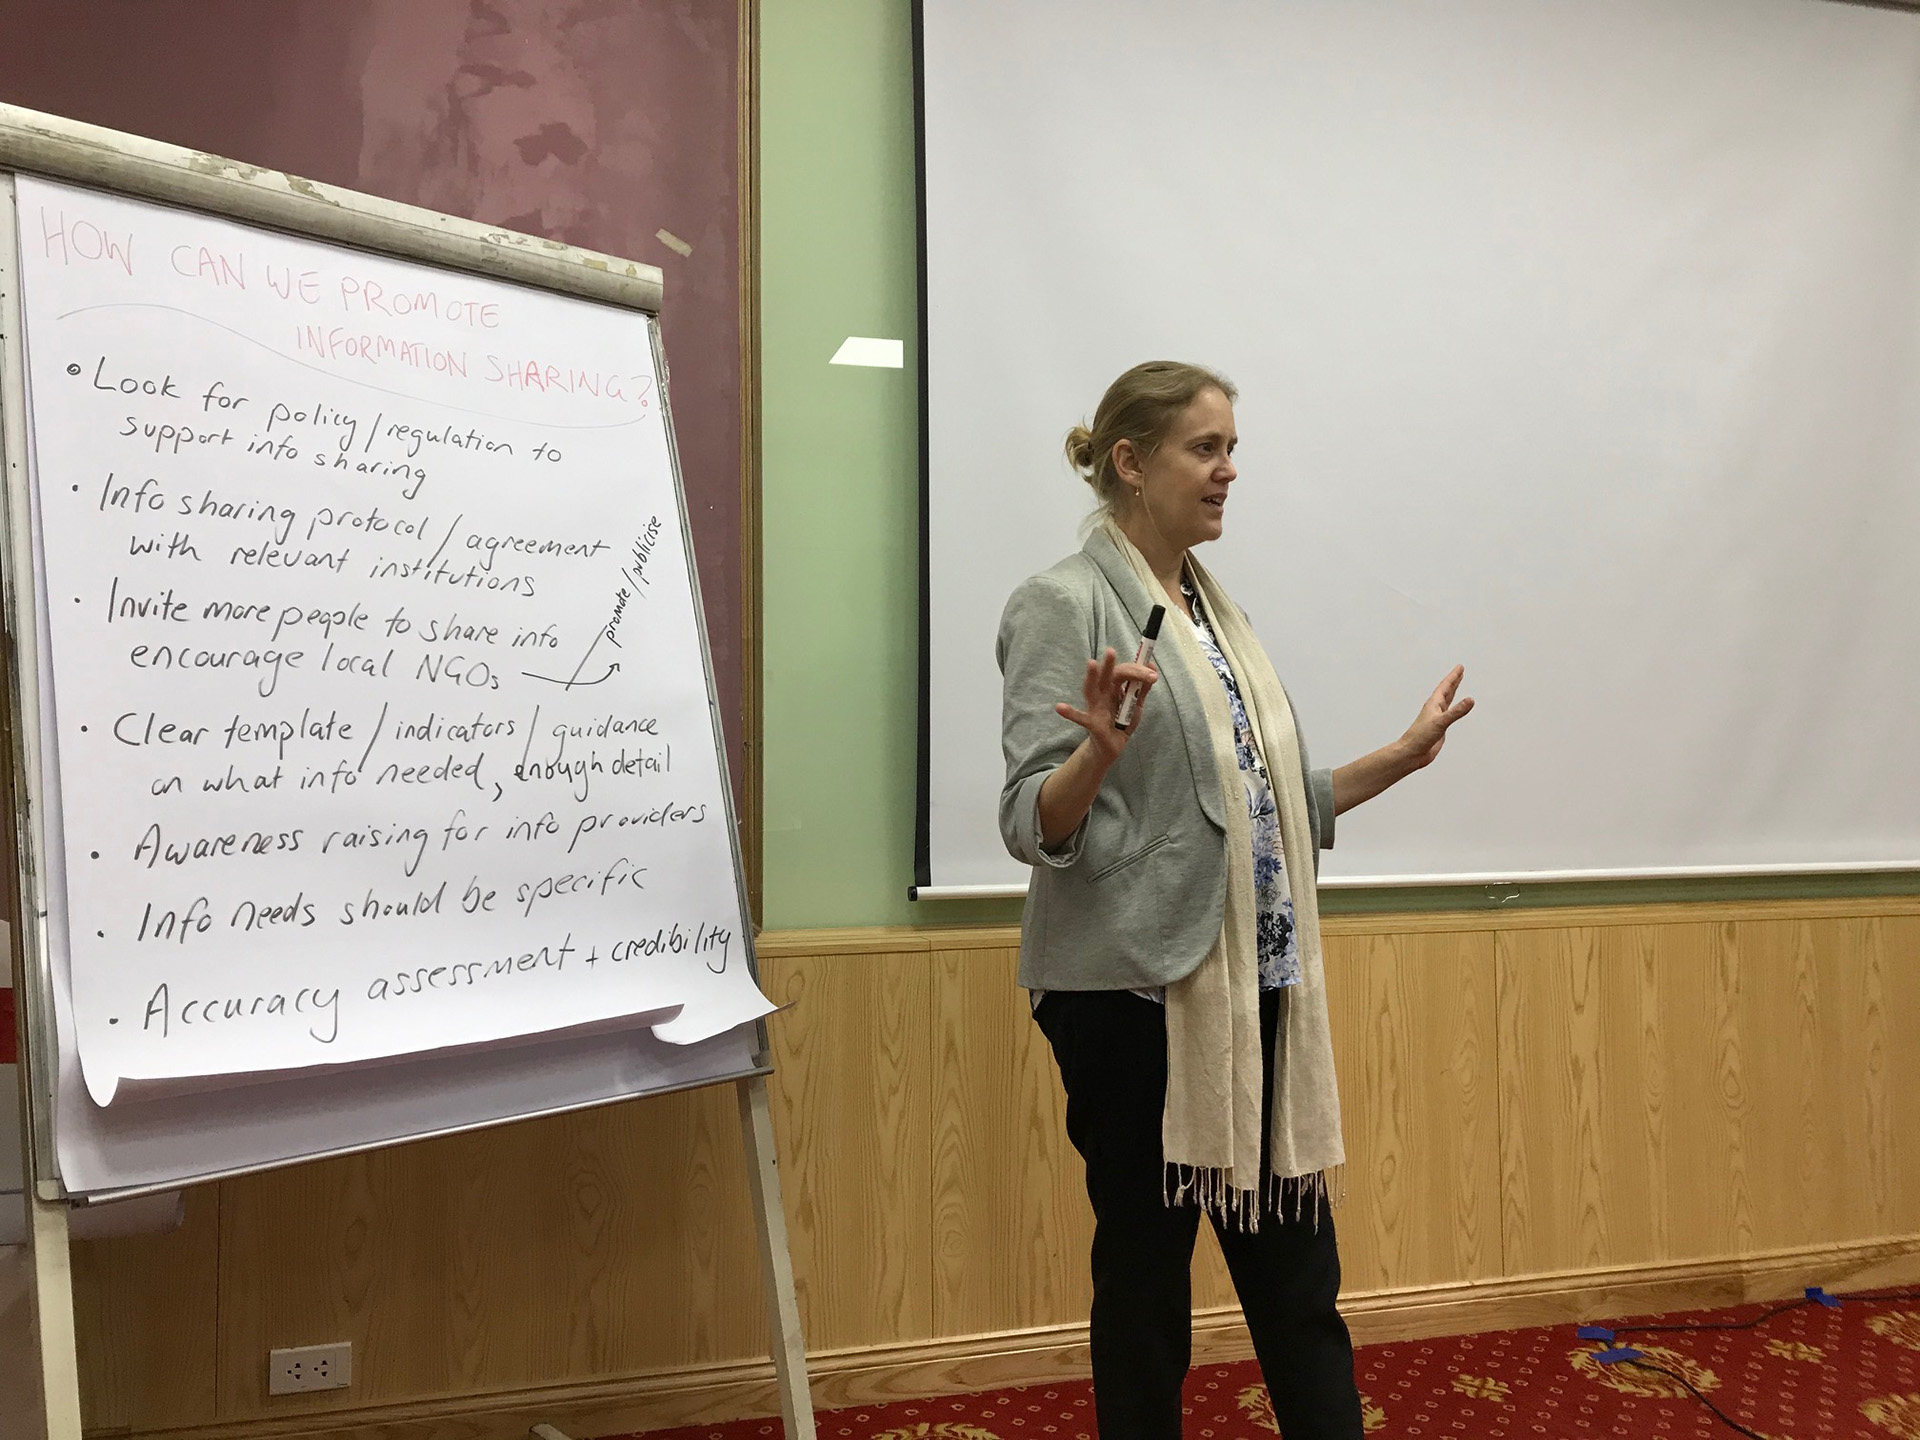 Charlotte Hicks from UNEP-WCMC facilitating a technical session on safeguards at the recent SIS workshop.